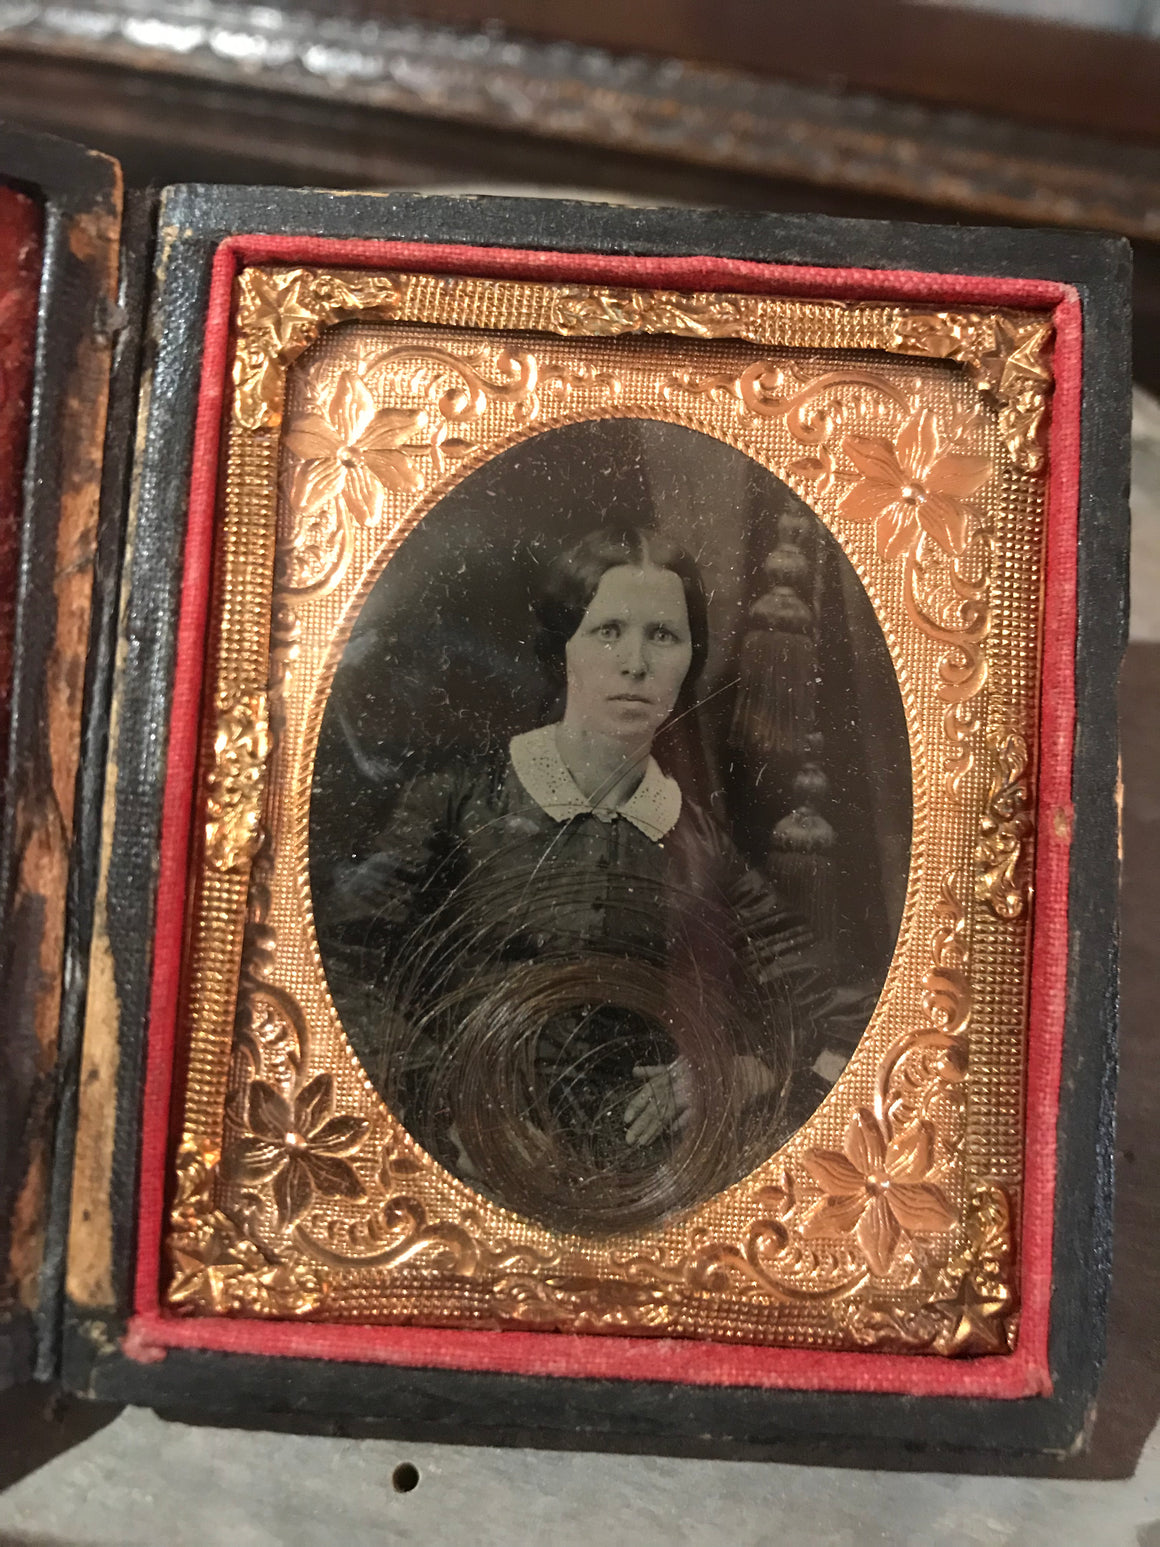 A 19th Century daguerreotype cased photograph of a lady with a lock of hair